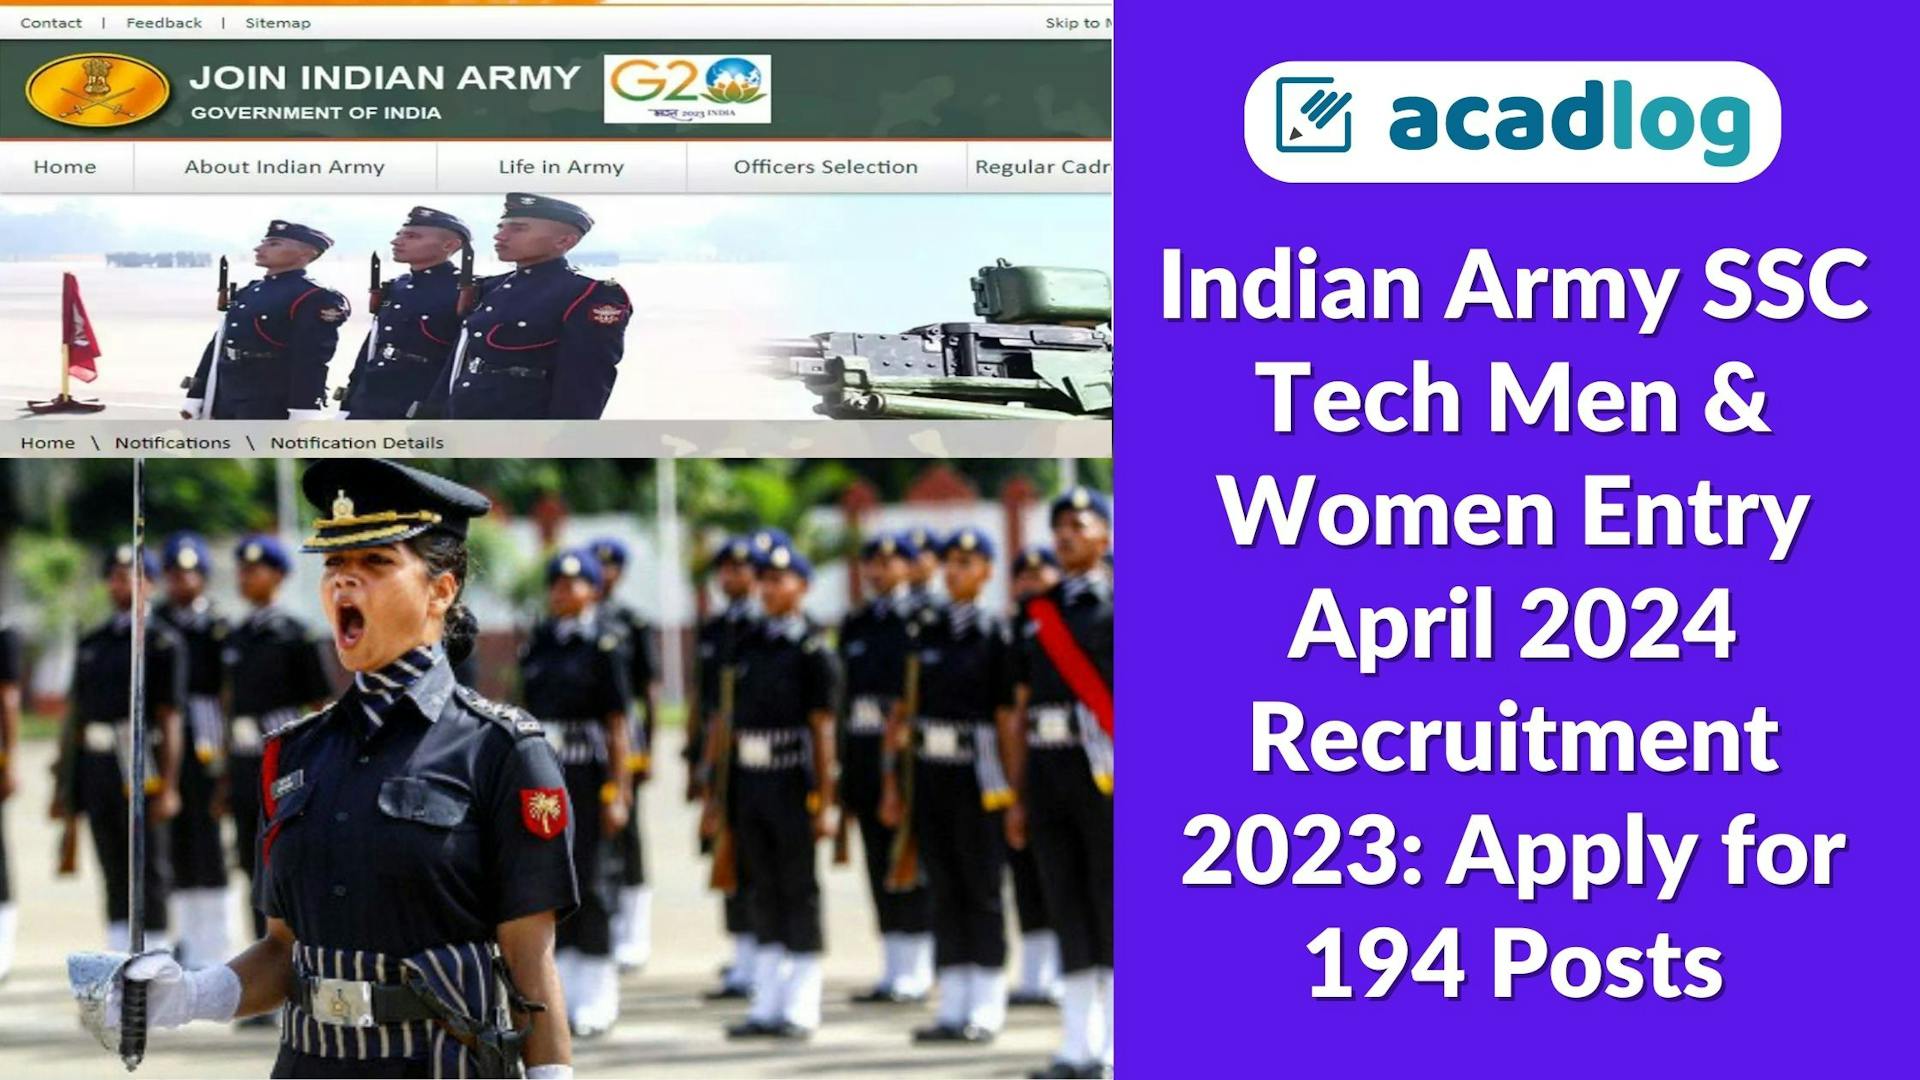 Indian Army SSC Tech Men & Women Entry April 2024 Recruitment 2023: Apply for 194 Posts